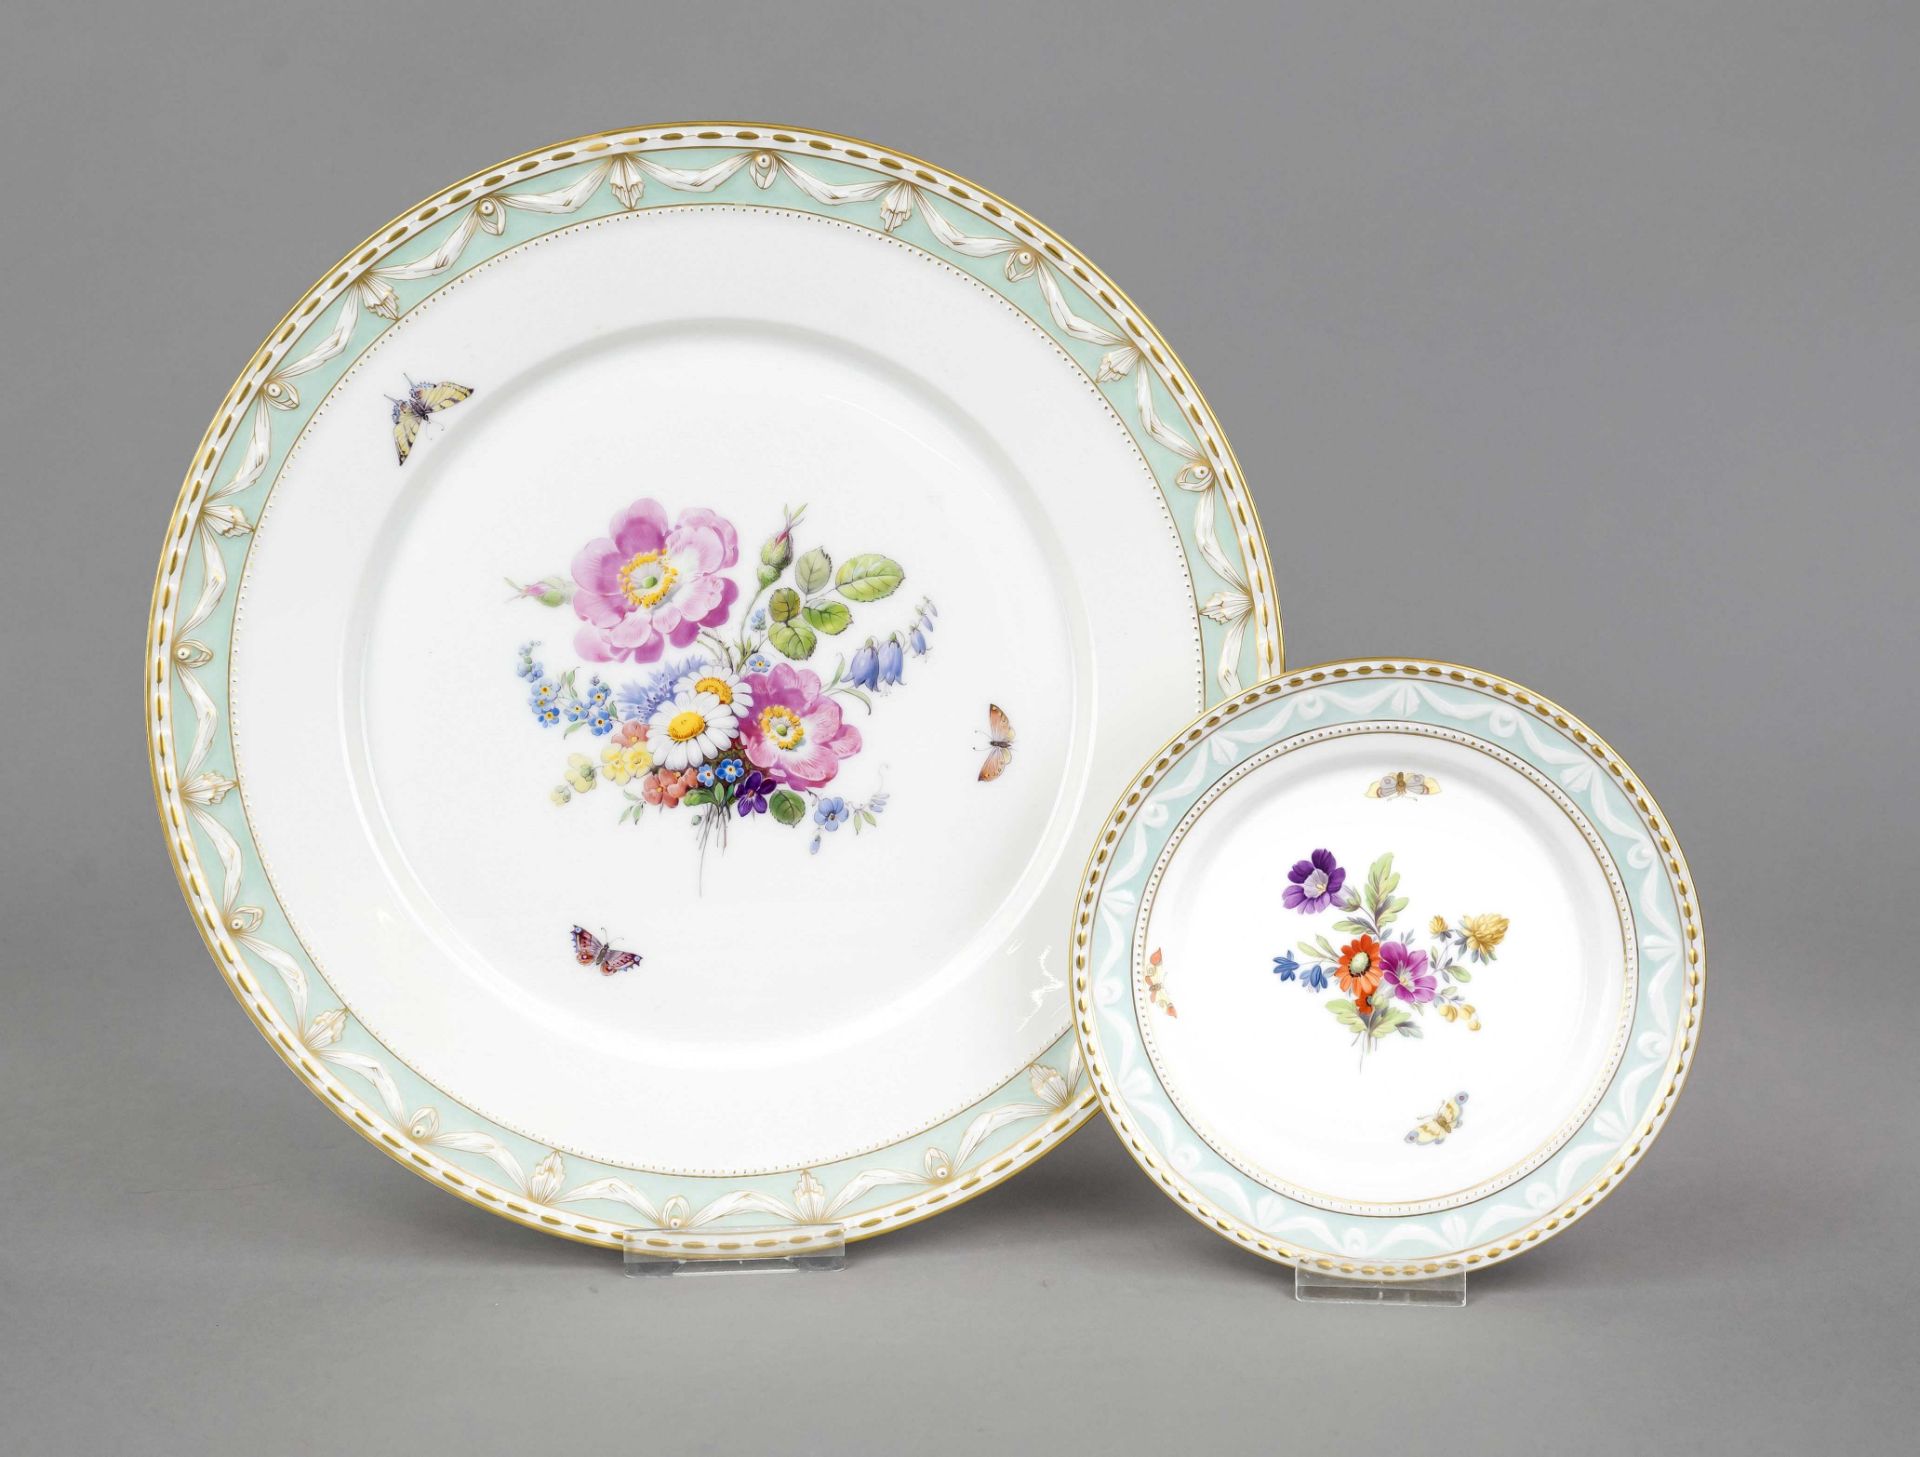 Two plates, KPM Berlin, marks 1870-1945 and 1981, 2nd choice, no painter's mark, 1x signed Emil